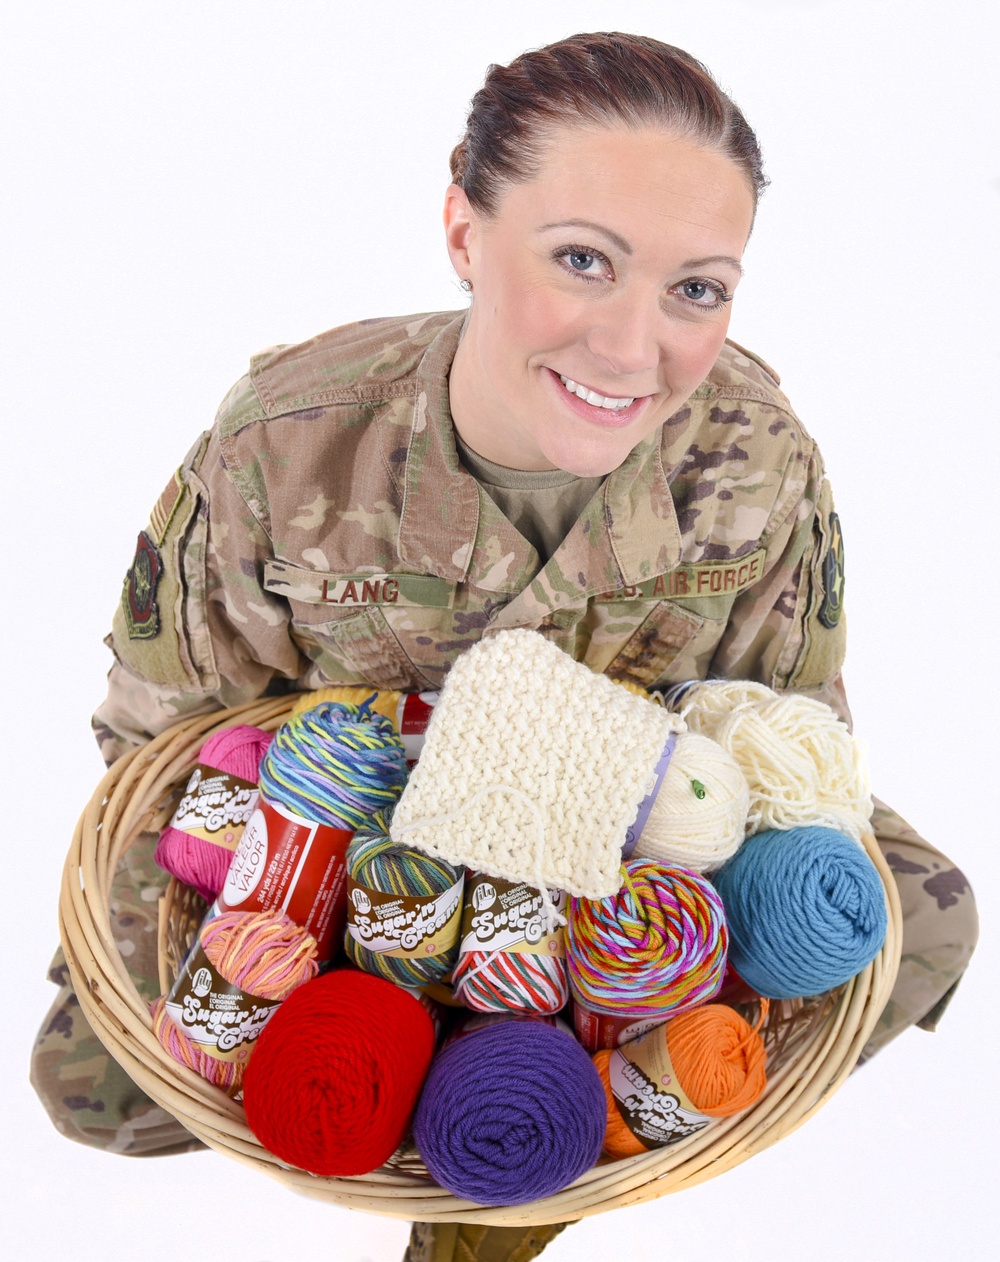 Crocheting A New Pattern Leads to Good Health